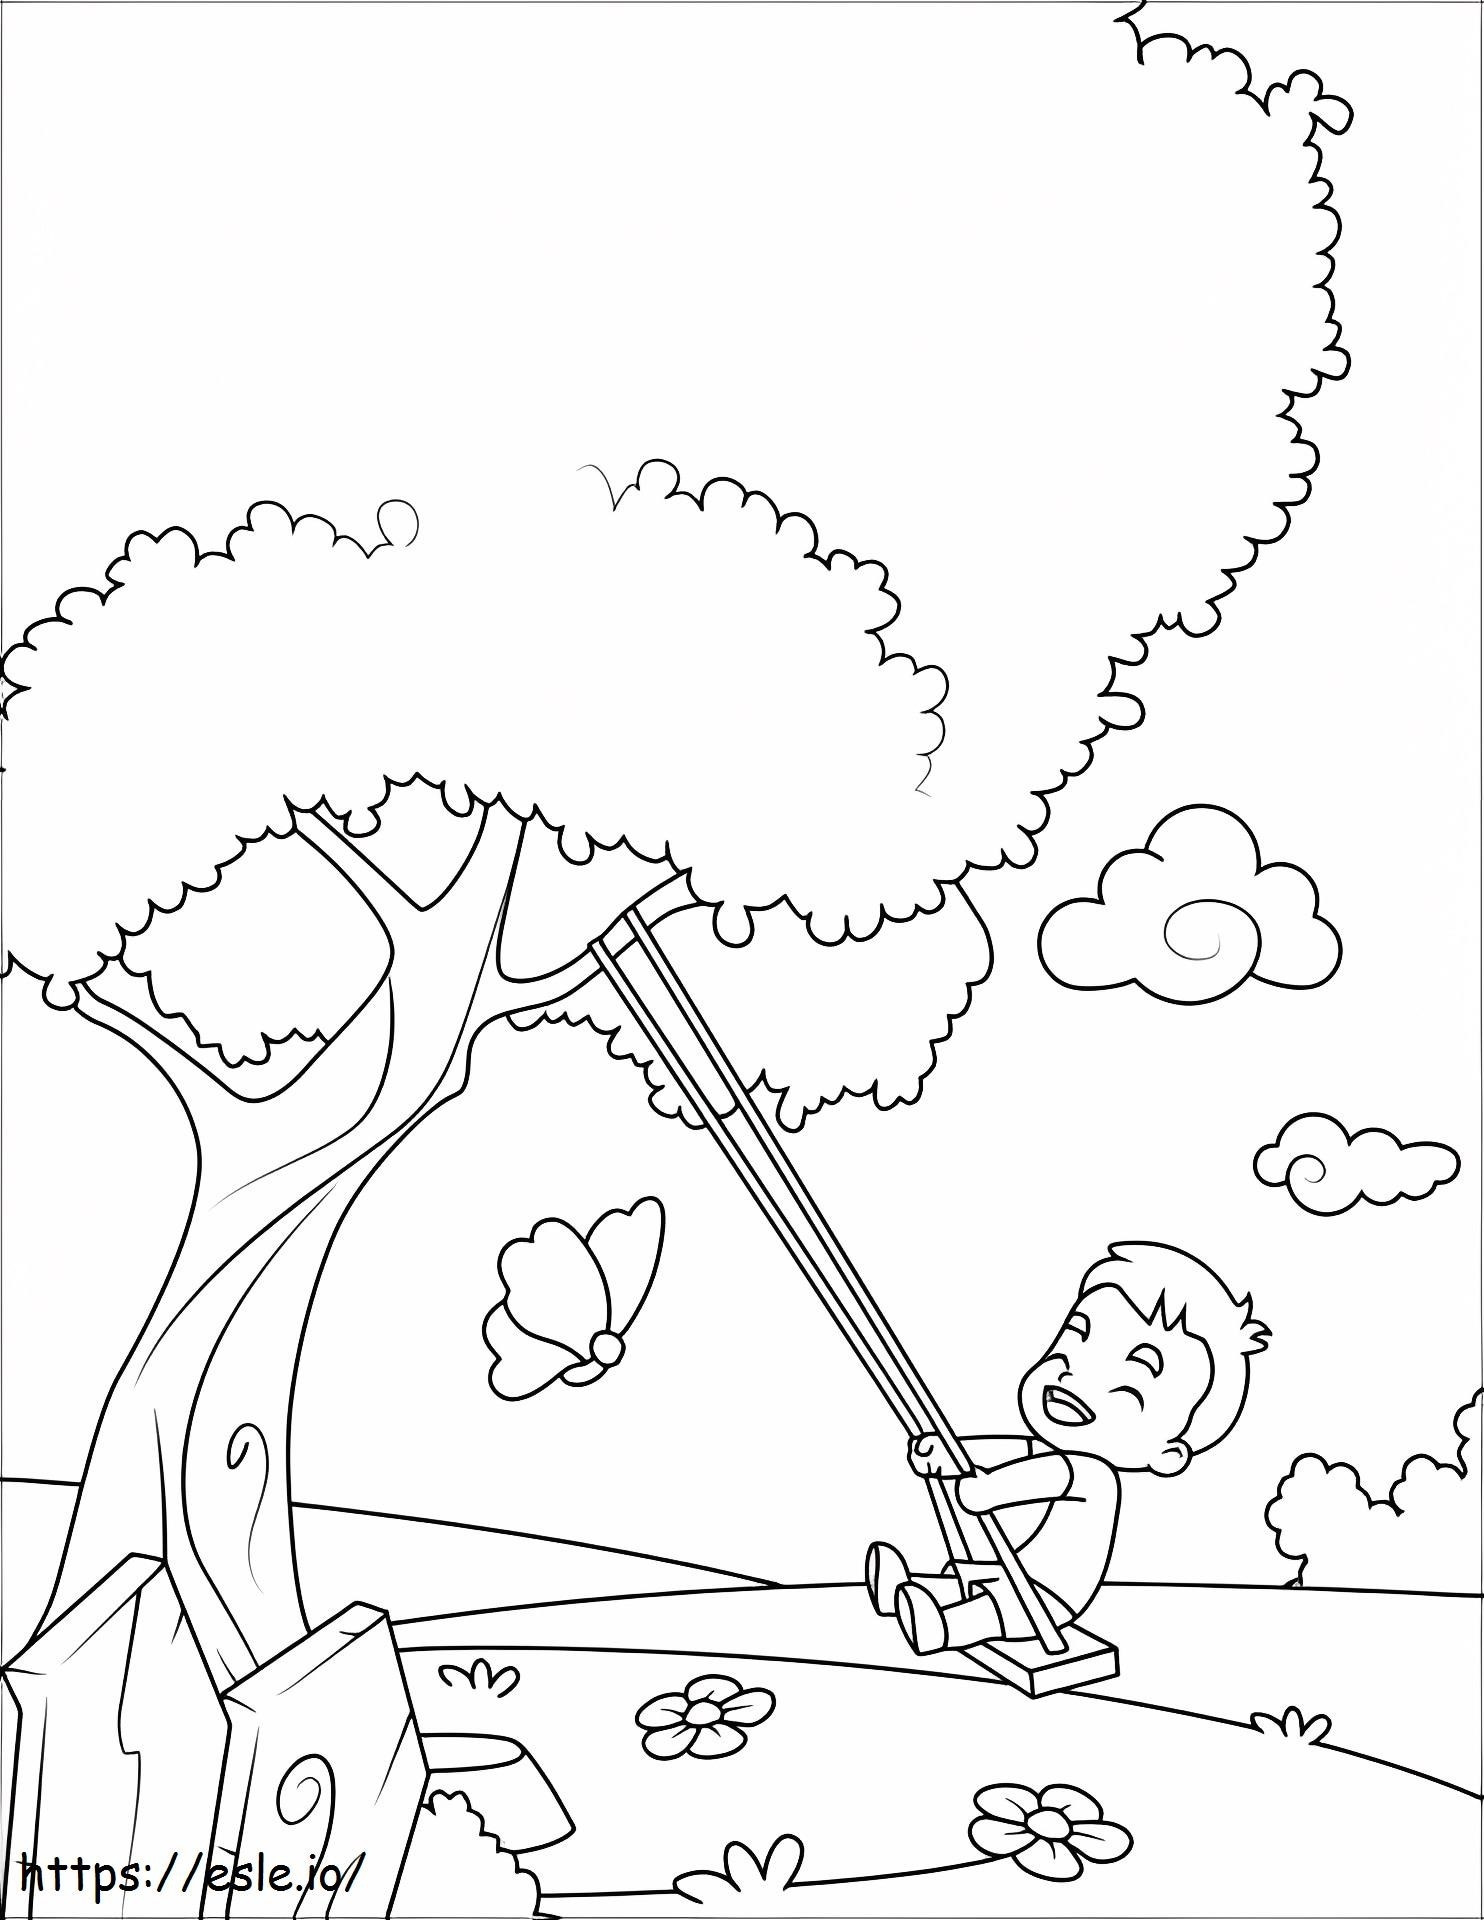 1533008634 Boy Swinging A4 coloring page